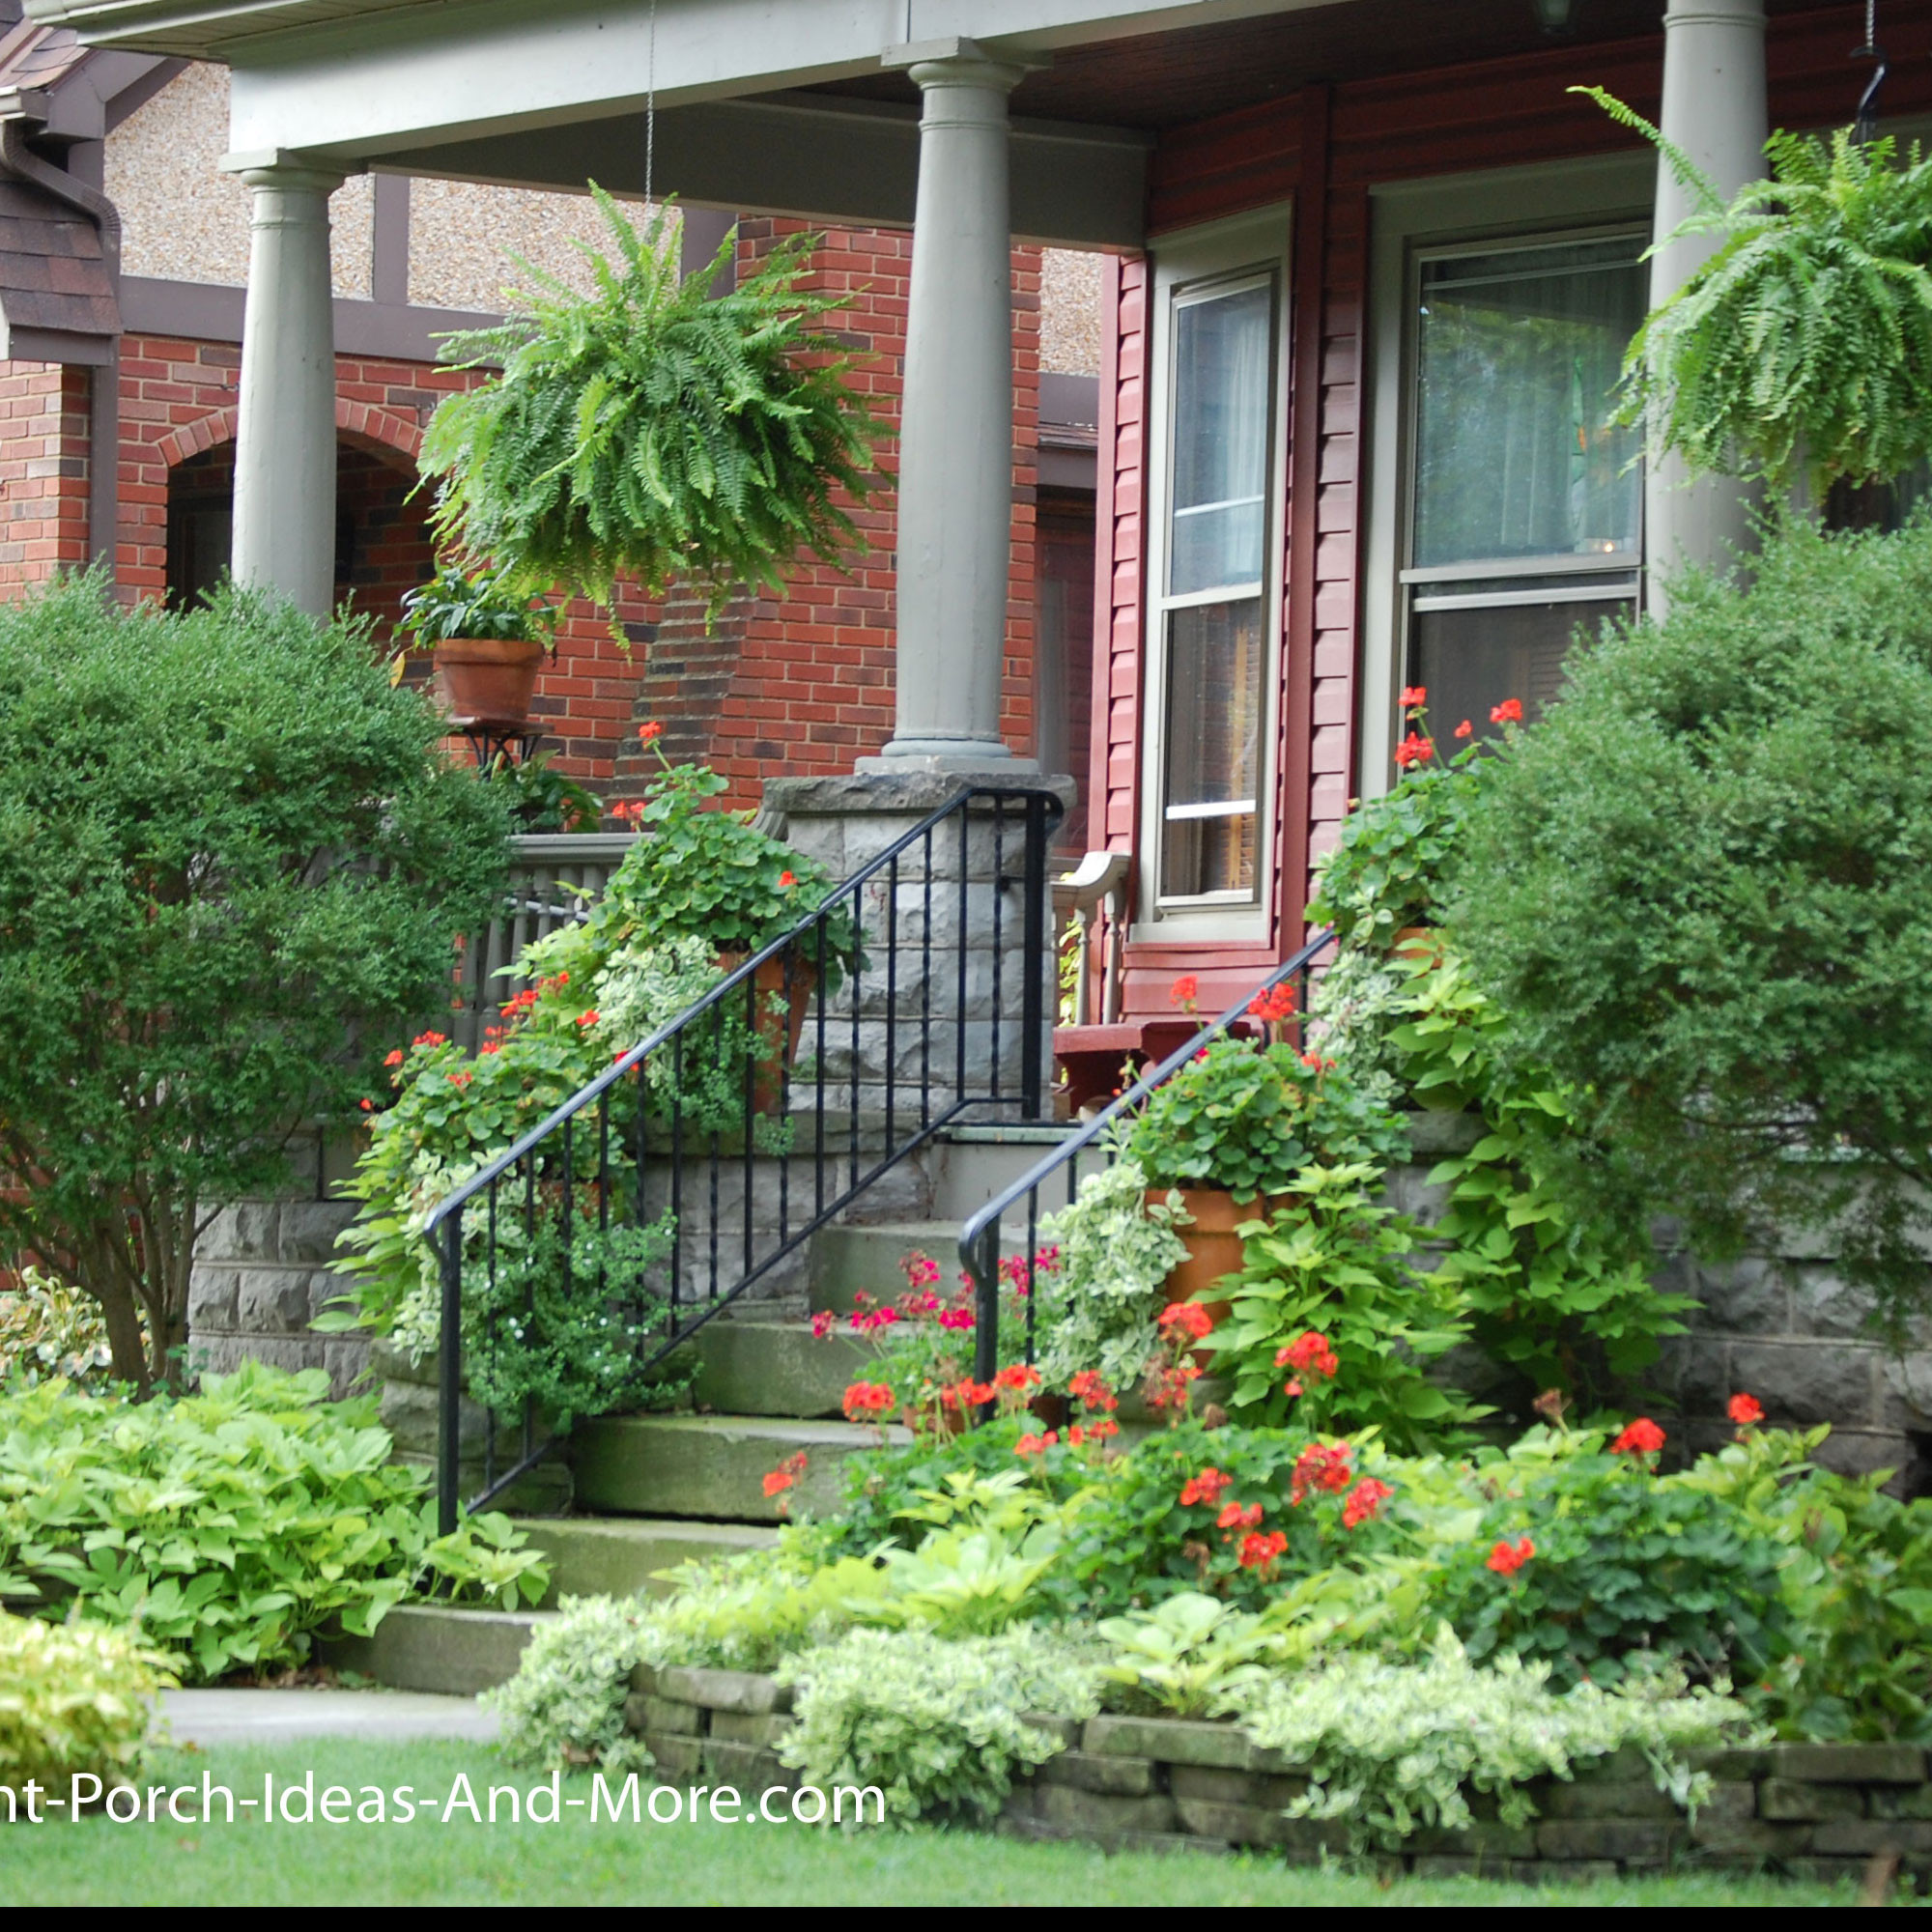 Landscape Around Front Porch
 Porch Landscaping Ideas for Your Front Yard and More